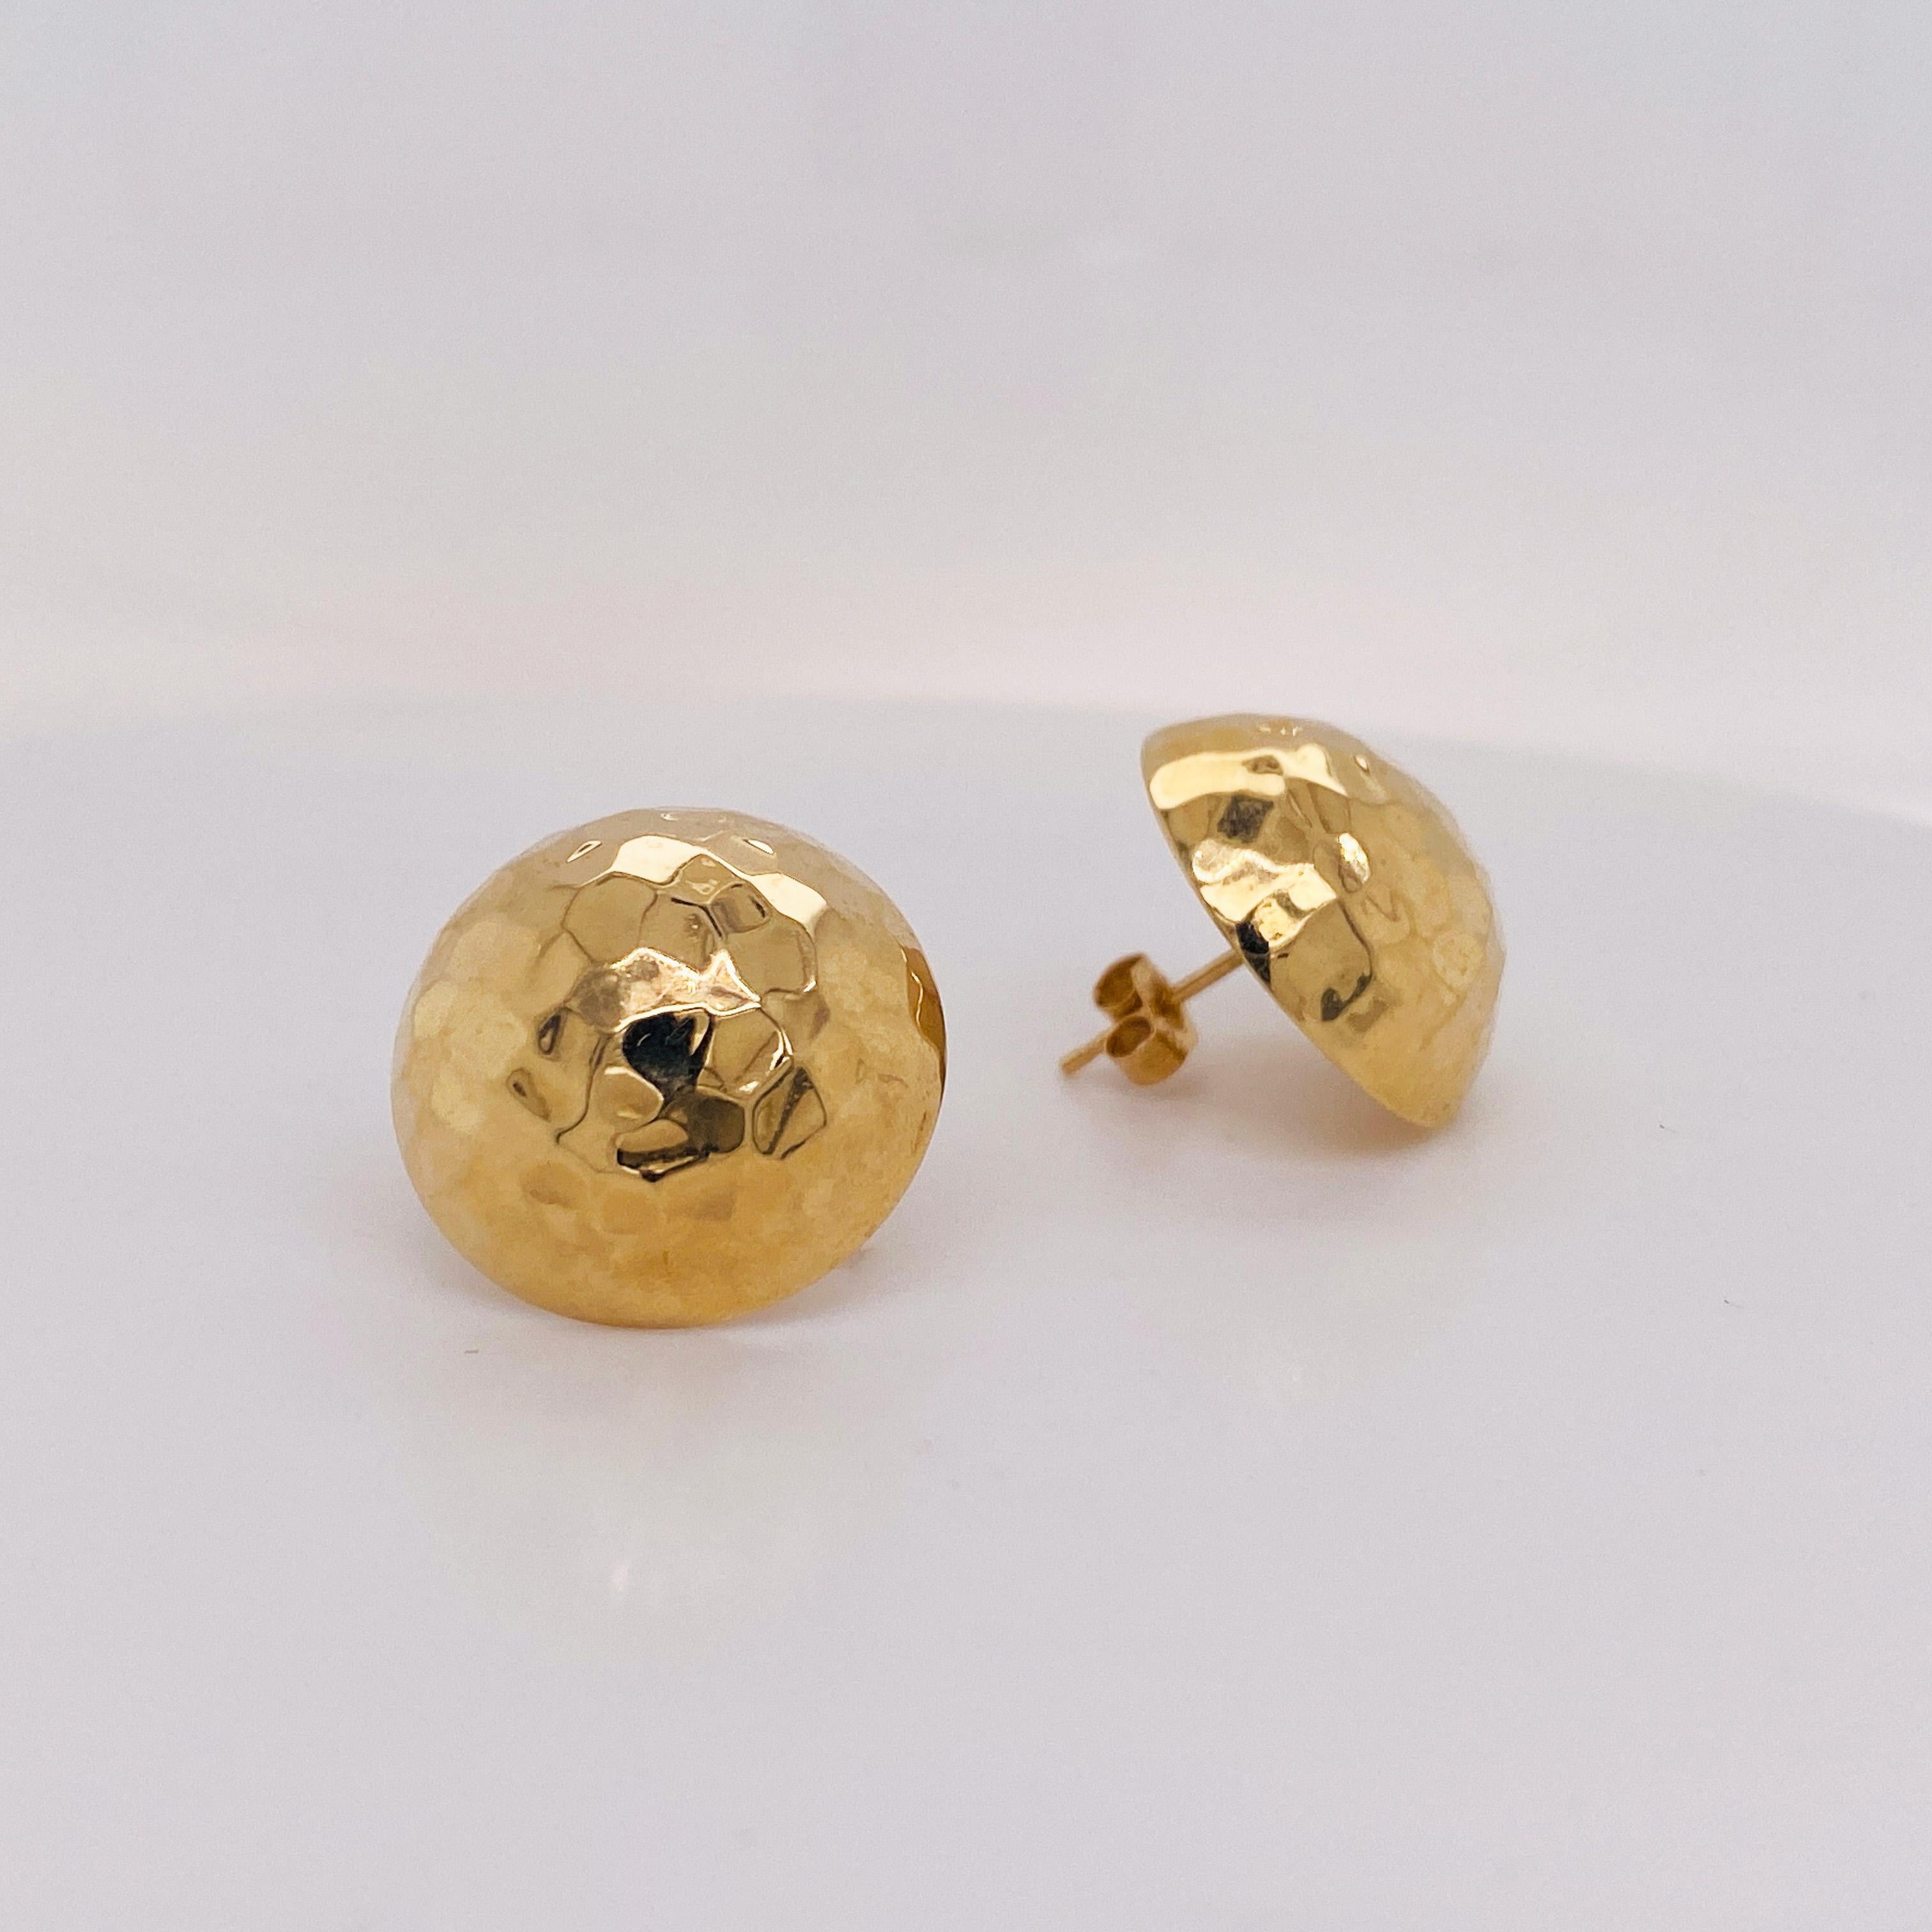 These yellow-gold circular button studs are lightweight and easy to wear. These make a great go-to accessory as they are lightweight and chic. The yellow gold goes with everything and stands out against all hair colors. Gold-hammered button earrings